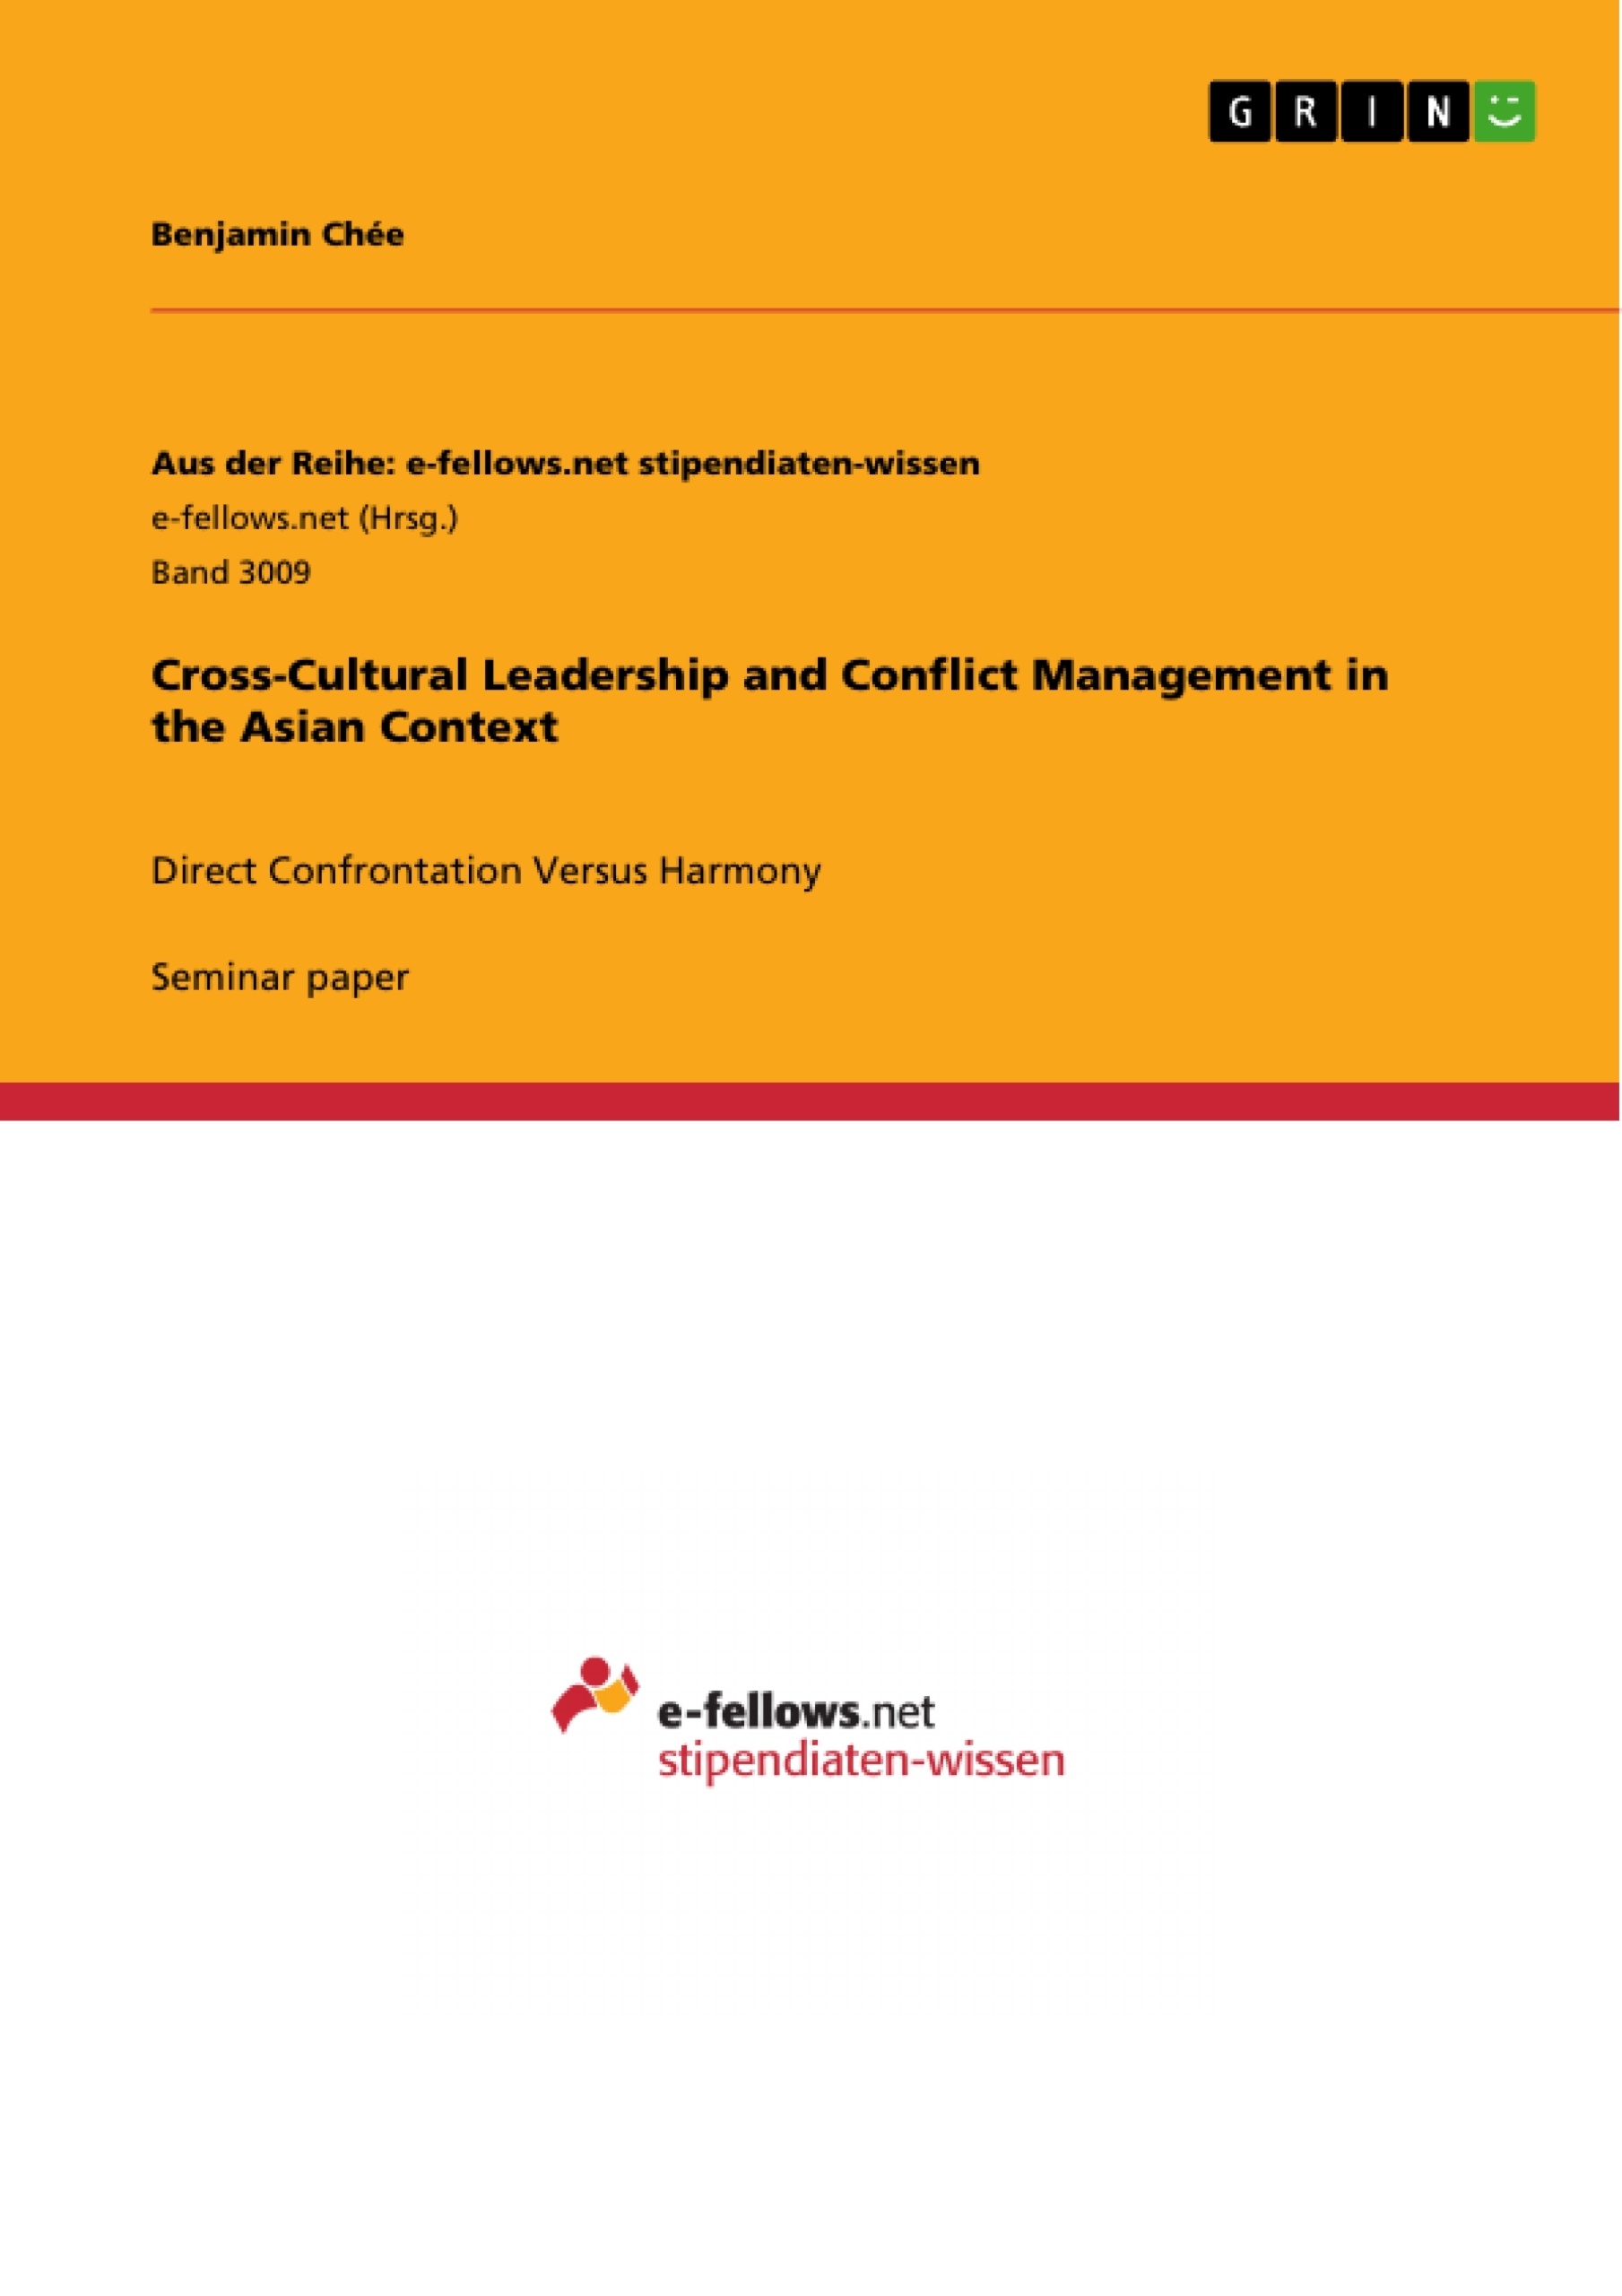 Title: Cross-Cultural Leadership and Conflict Management in the Asian Context